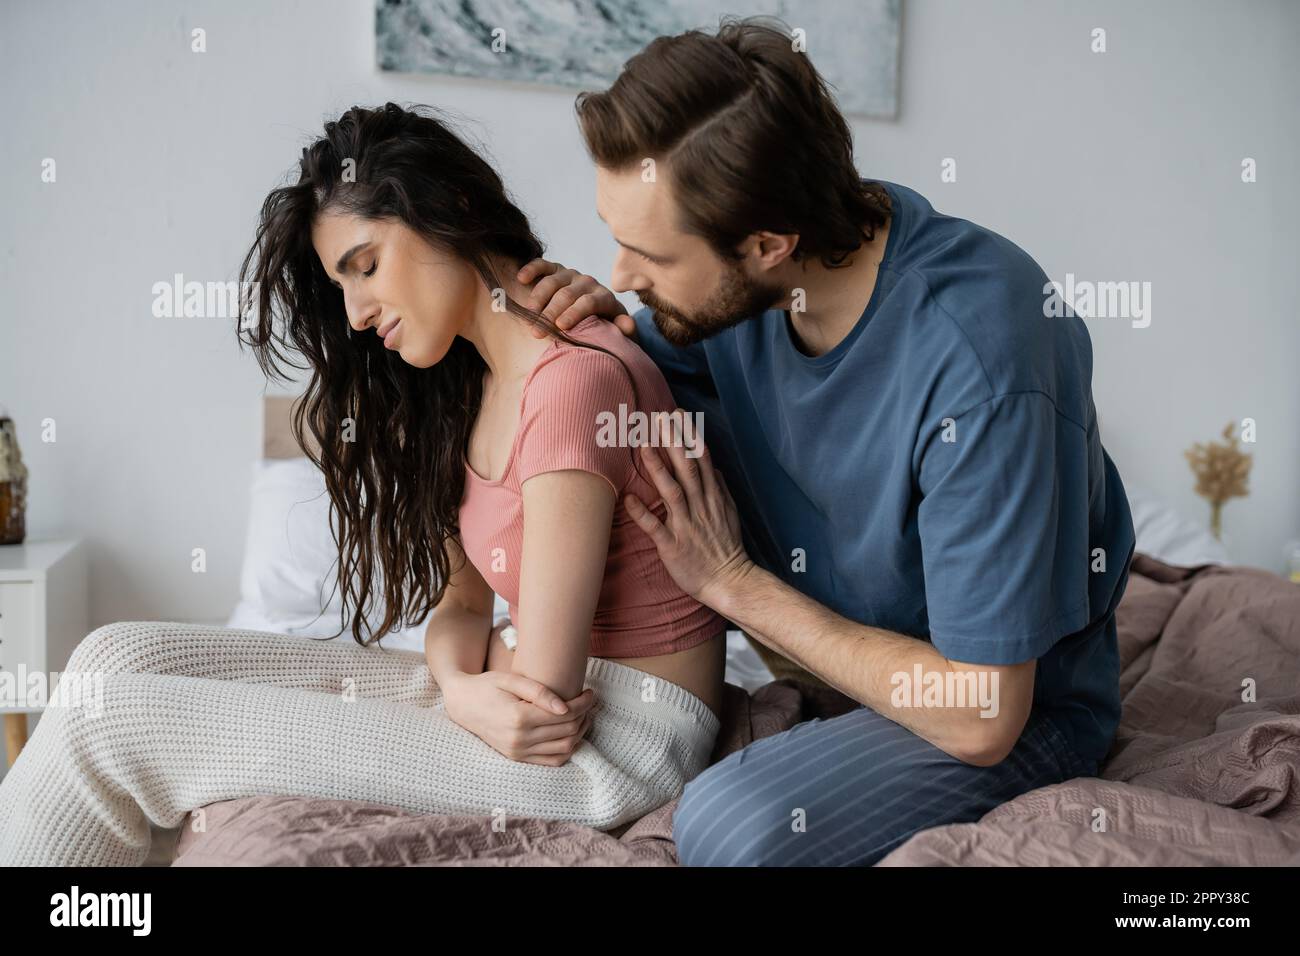 Bearded man calming disappointed girlfriend in pajama in bedroom,stock image Stock Photo